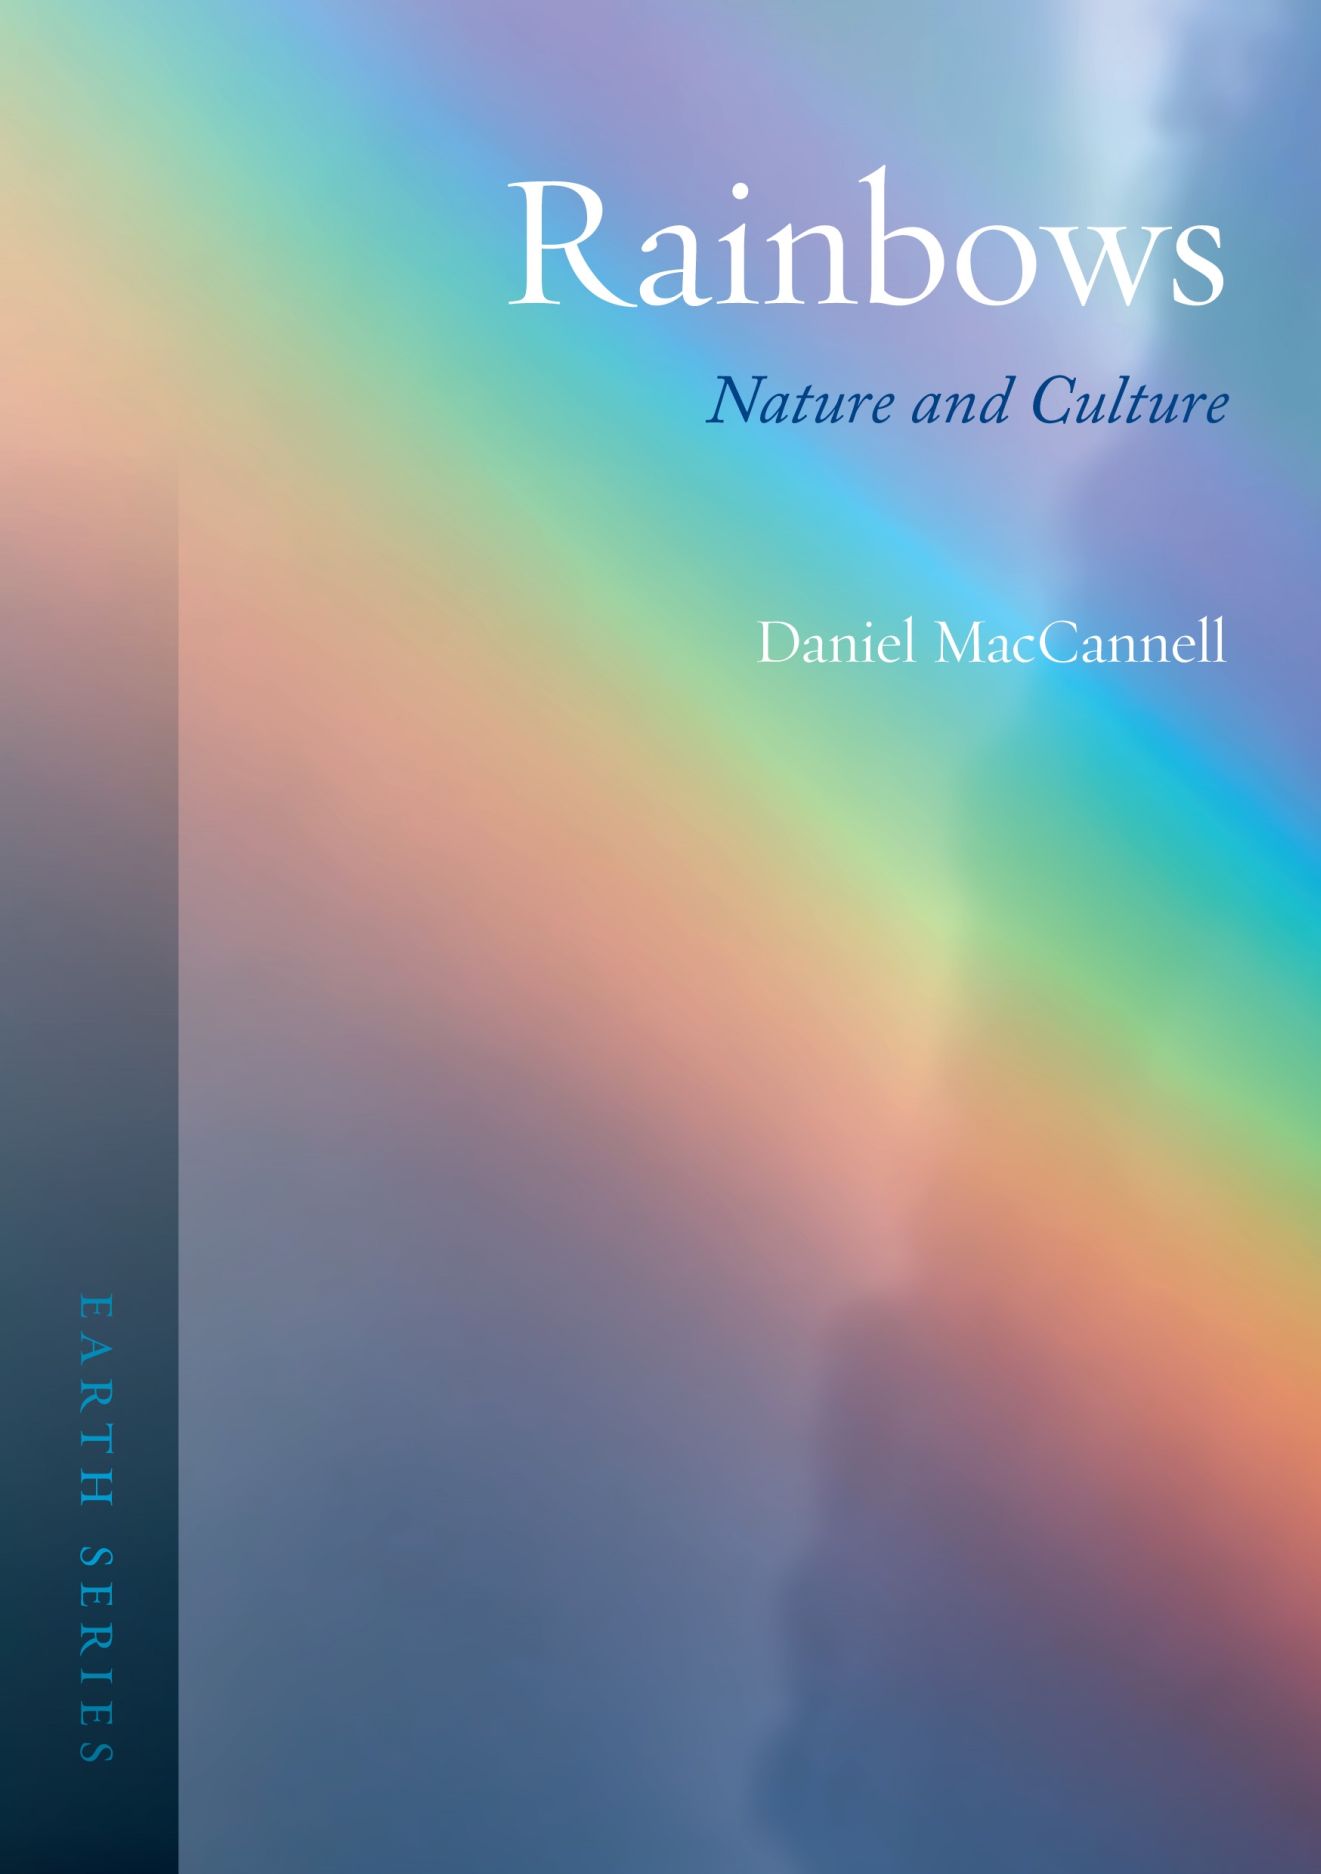 Rainbows: Nature and Culture, MacCannell